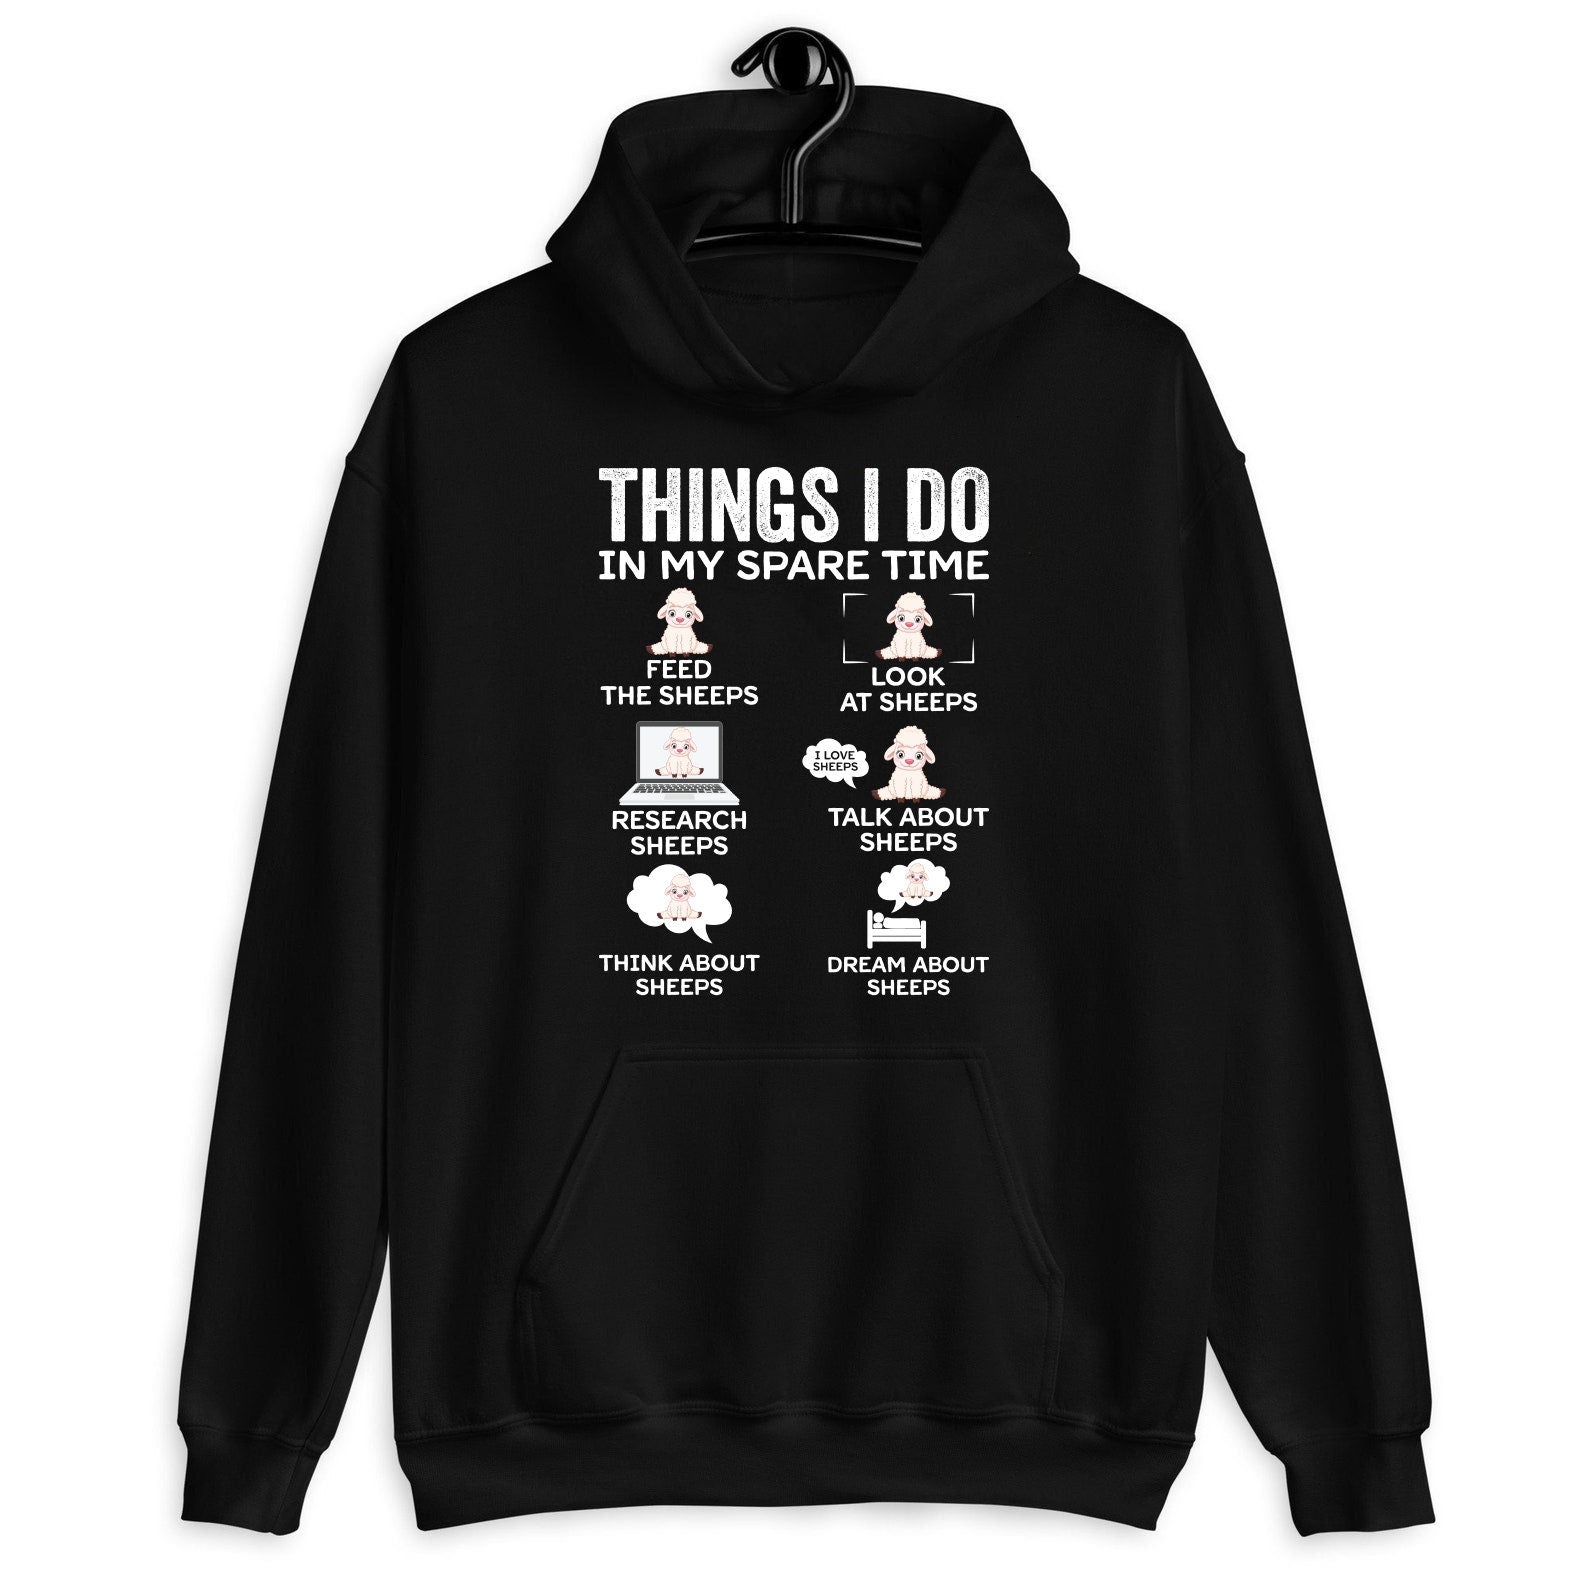 Things I Do In My Spare Time Shirt, Funny Sheep Shirt, Sheep Owner Shirt, Sheep Farmer Shirt